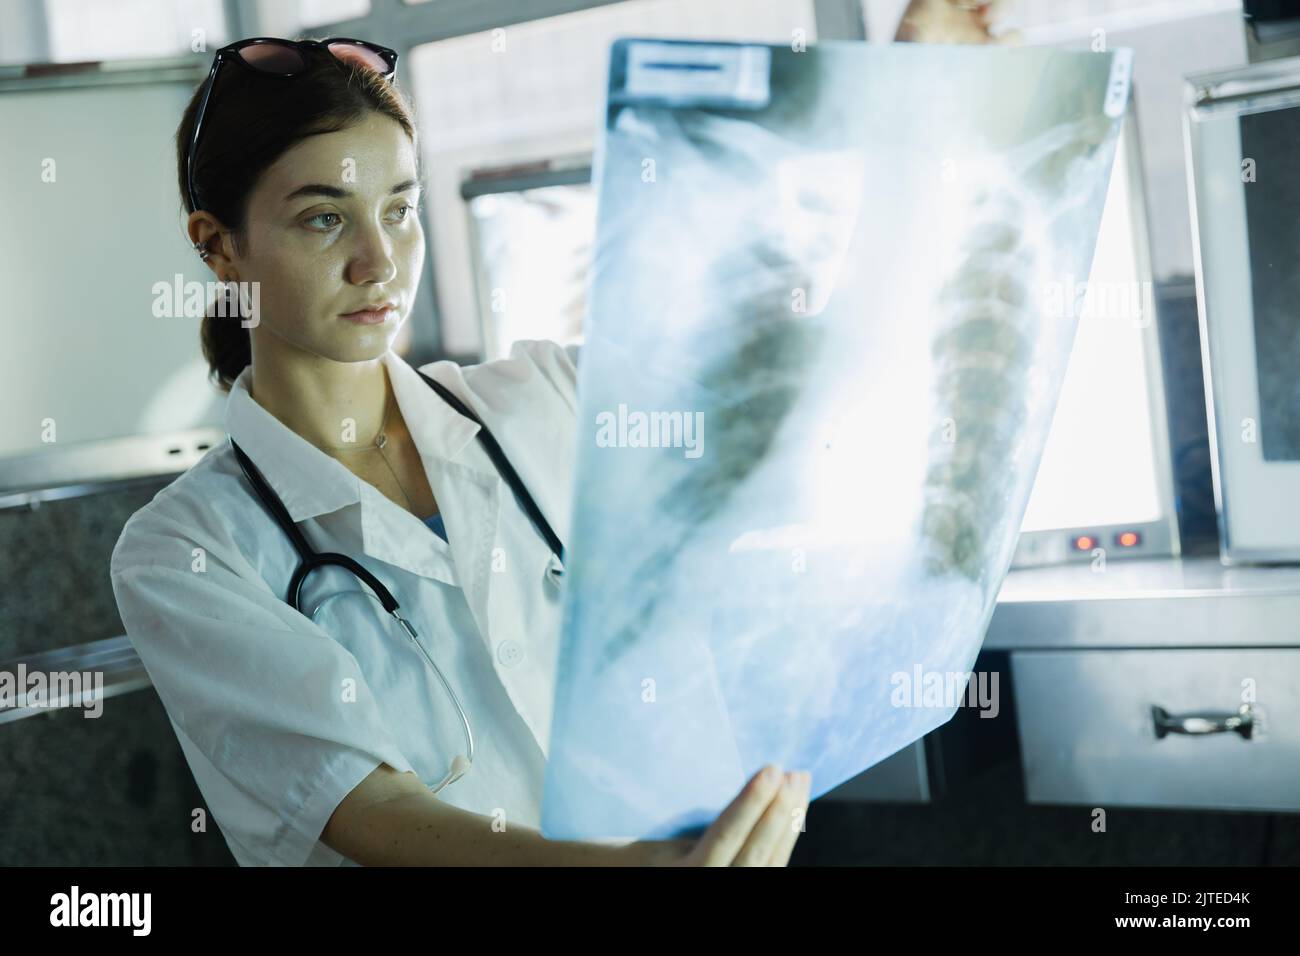 Female doctor check on scan results on monitors in laboratory Stock Photo